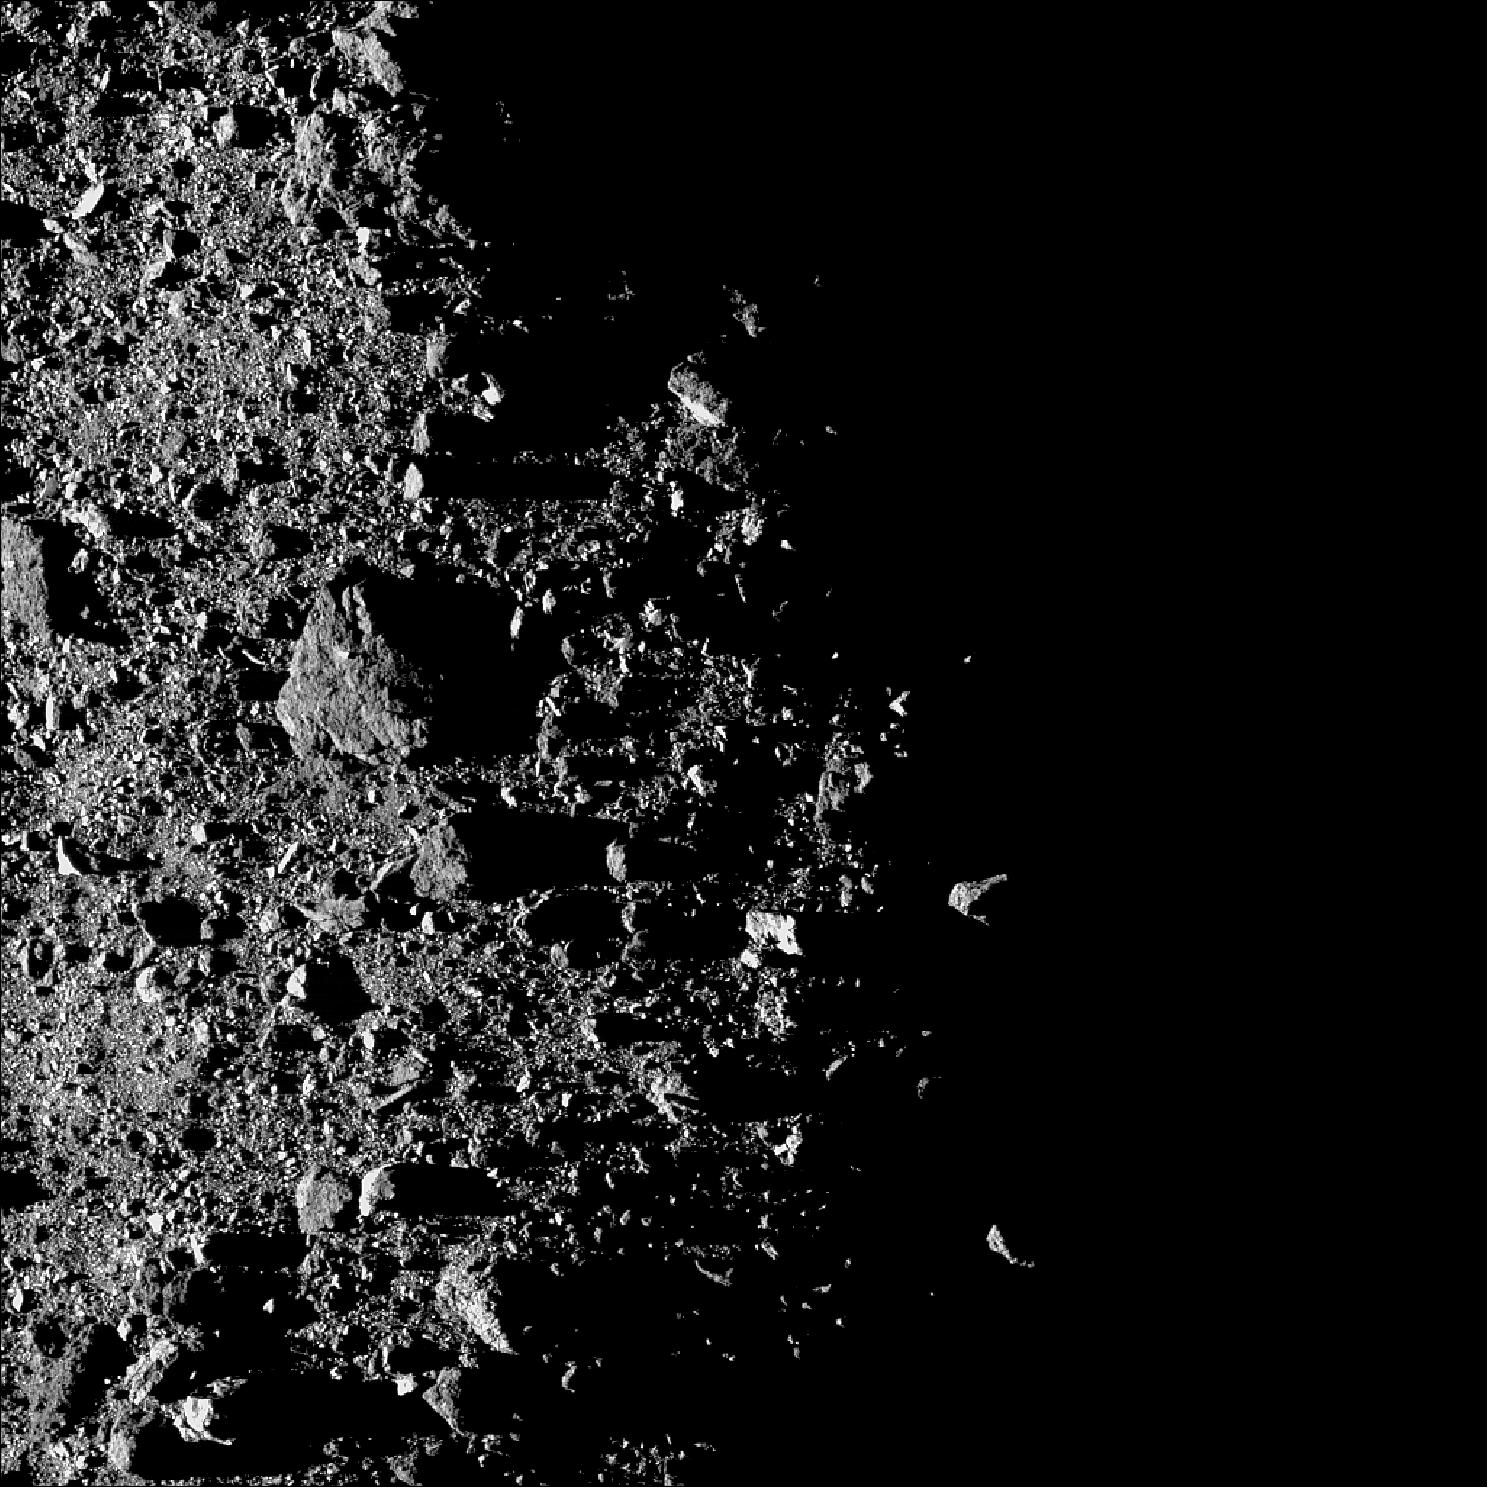 Figure 59: This image of OCAMS (MapCam) shows a region near asteroid Bennu’s north pole on the terminator line between the asteroid’s day and night sides. The OSIRIS-REx spacecraft’s MapCam camera obtained the image on Feb. 20 while in orbit around the asteroid from a distance of 1.8 km. At this distance, each pixel covers approximately 12 cm of Bennu’s surface. The largest boulder, located slightly left of the center, measures around 16 meters across, which, for scale, is the length of the trailer on a semi-truck (image credit: NASA/Goddard/University of Arizona)